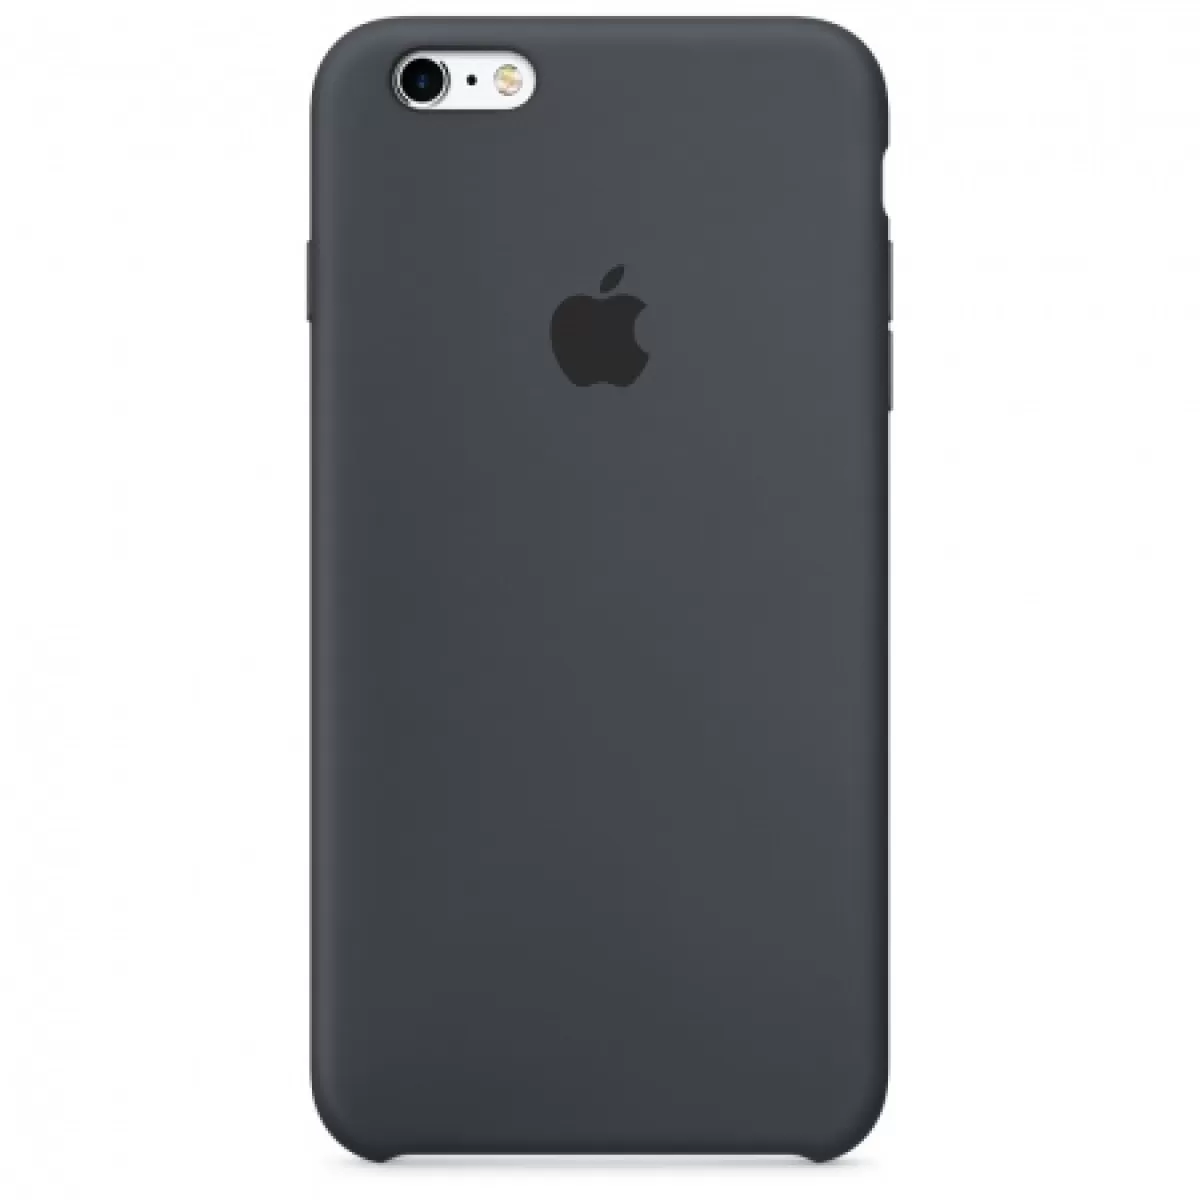 Apple iPhone 6s Silicone Case Charcoal Gray